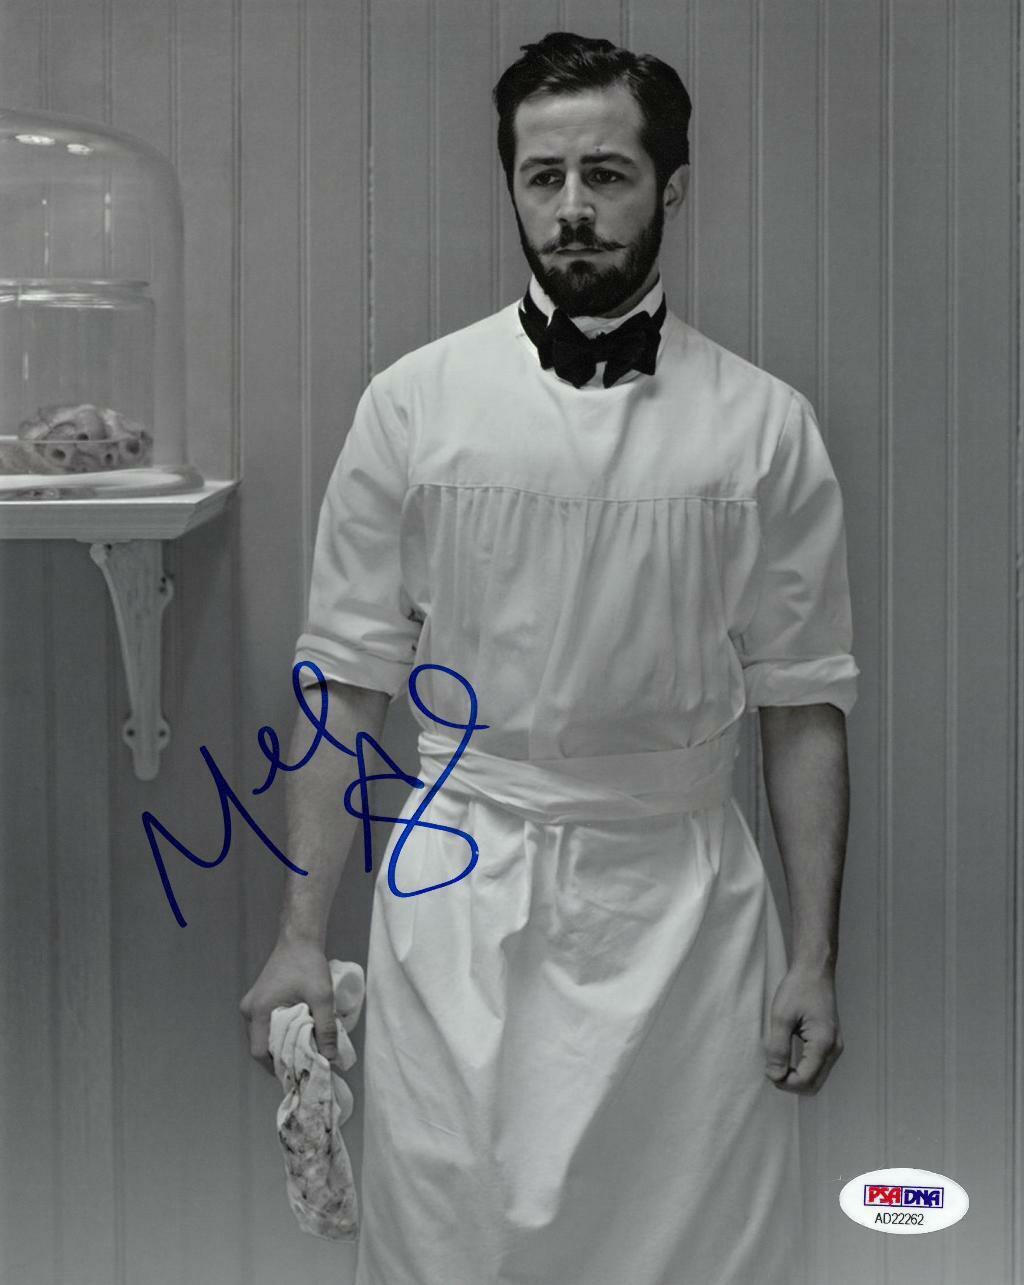 Michael Angarano Signed Authentic Autographed 8x10 Photo Poster painting PSA/DNA #AD22262